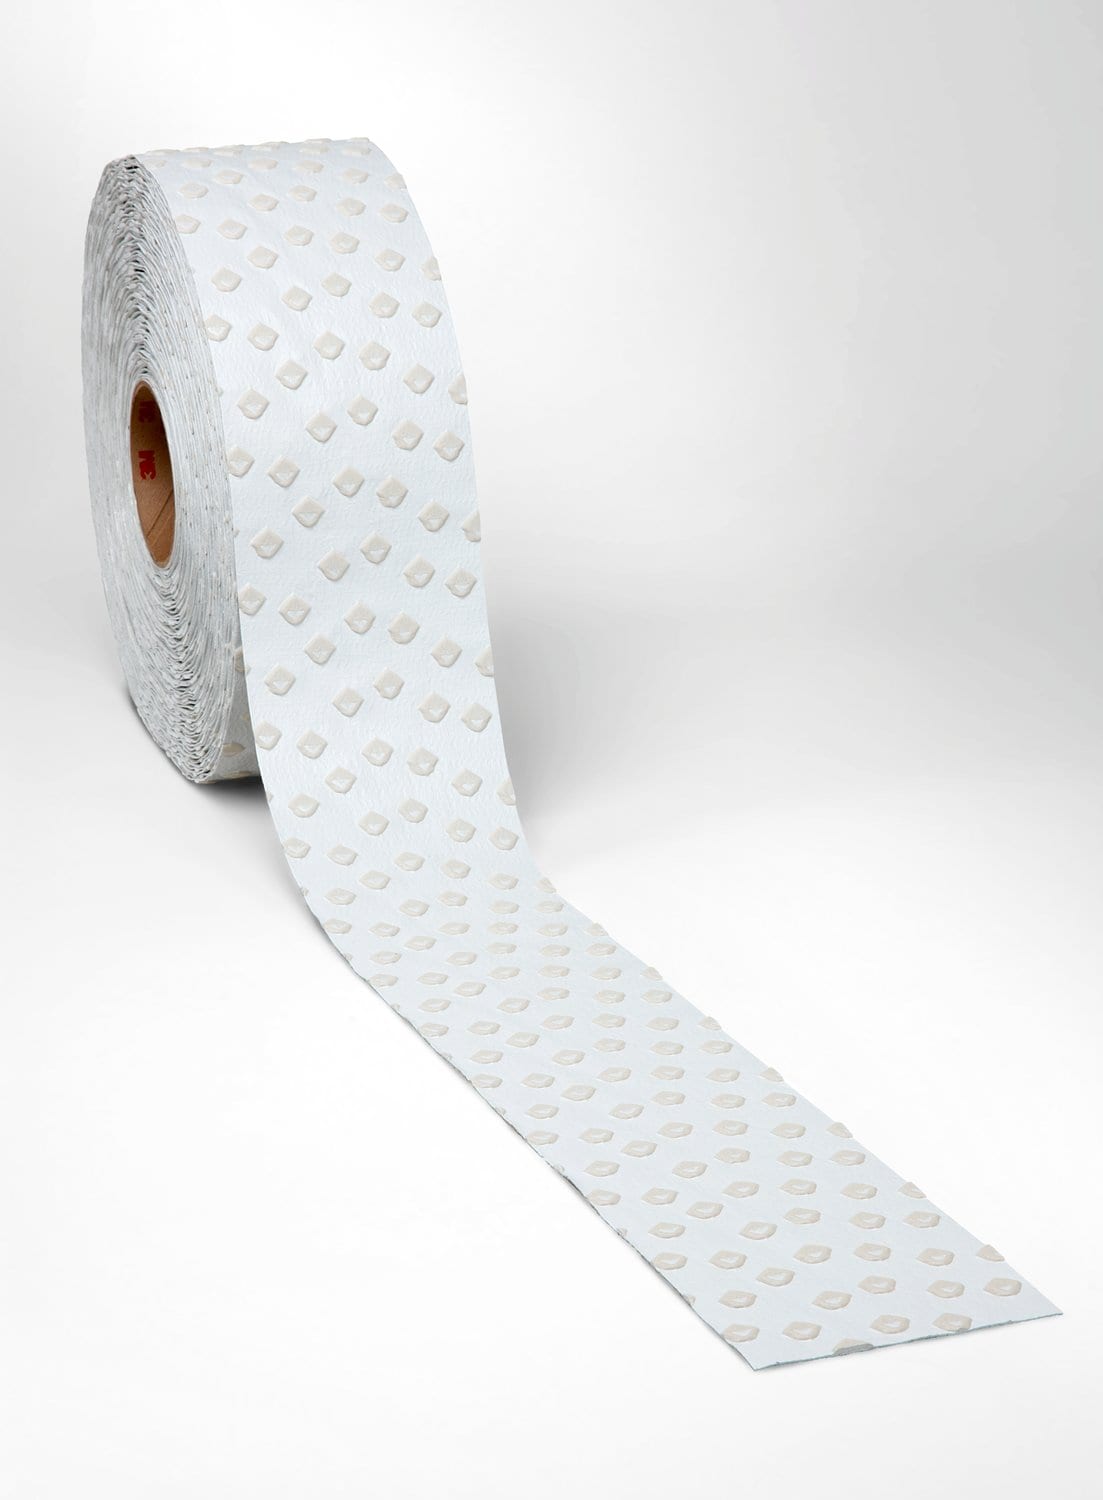 7010389522 - 3M Stamark Removable Pavement Marking Tape A710, White, IL only, 5 in
x 120 yd